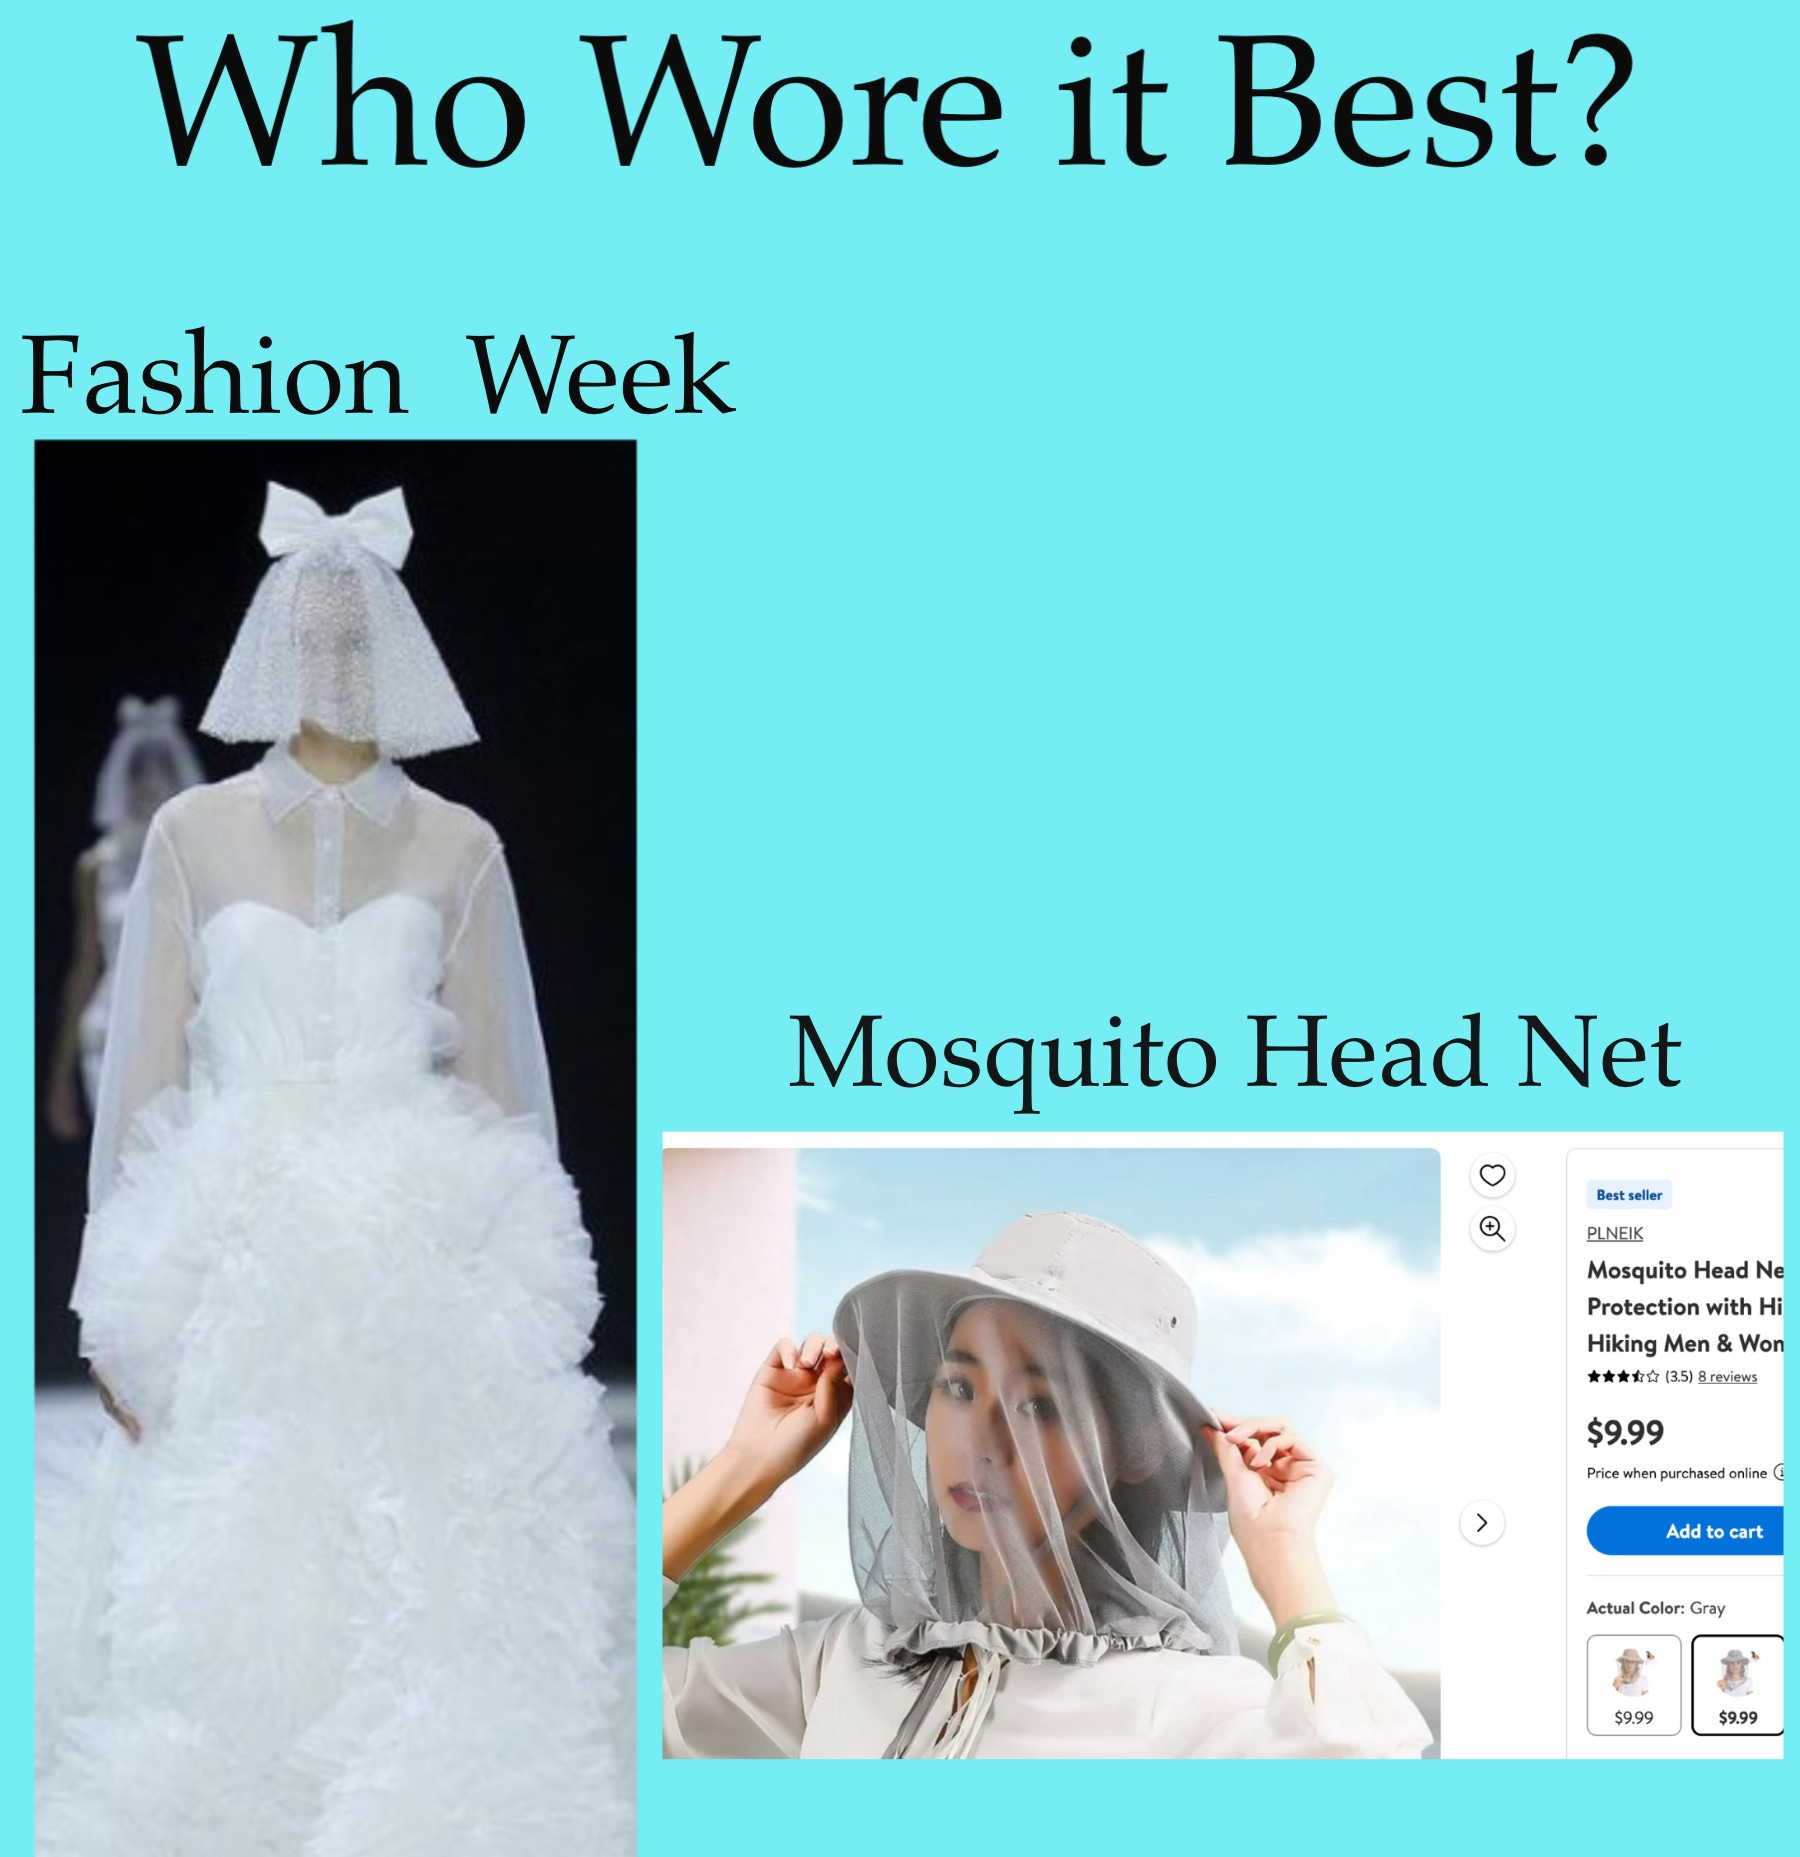 FASHION WEEK PART 2: WHO WORE IT BEST THIS TIME?